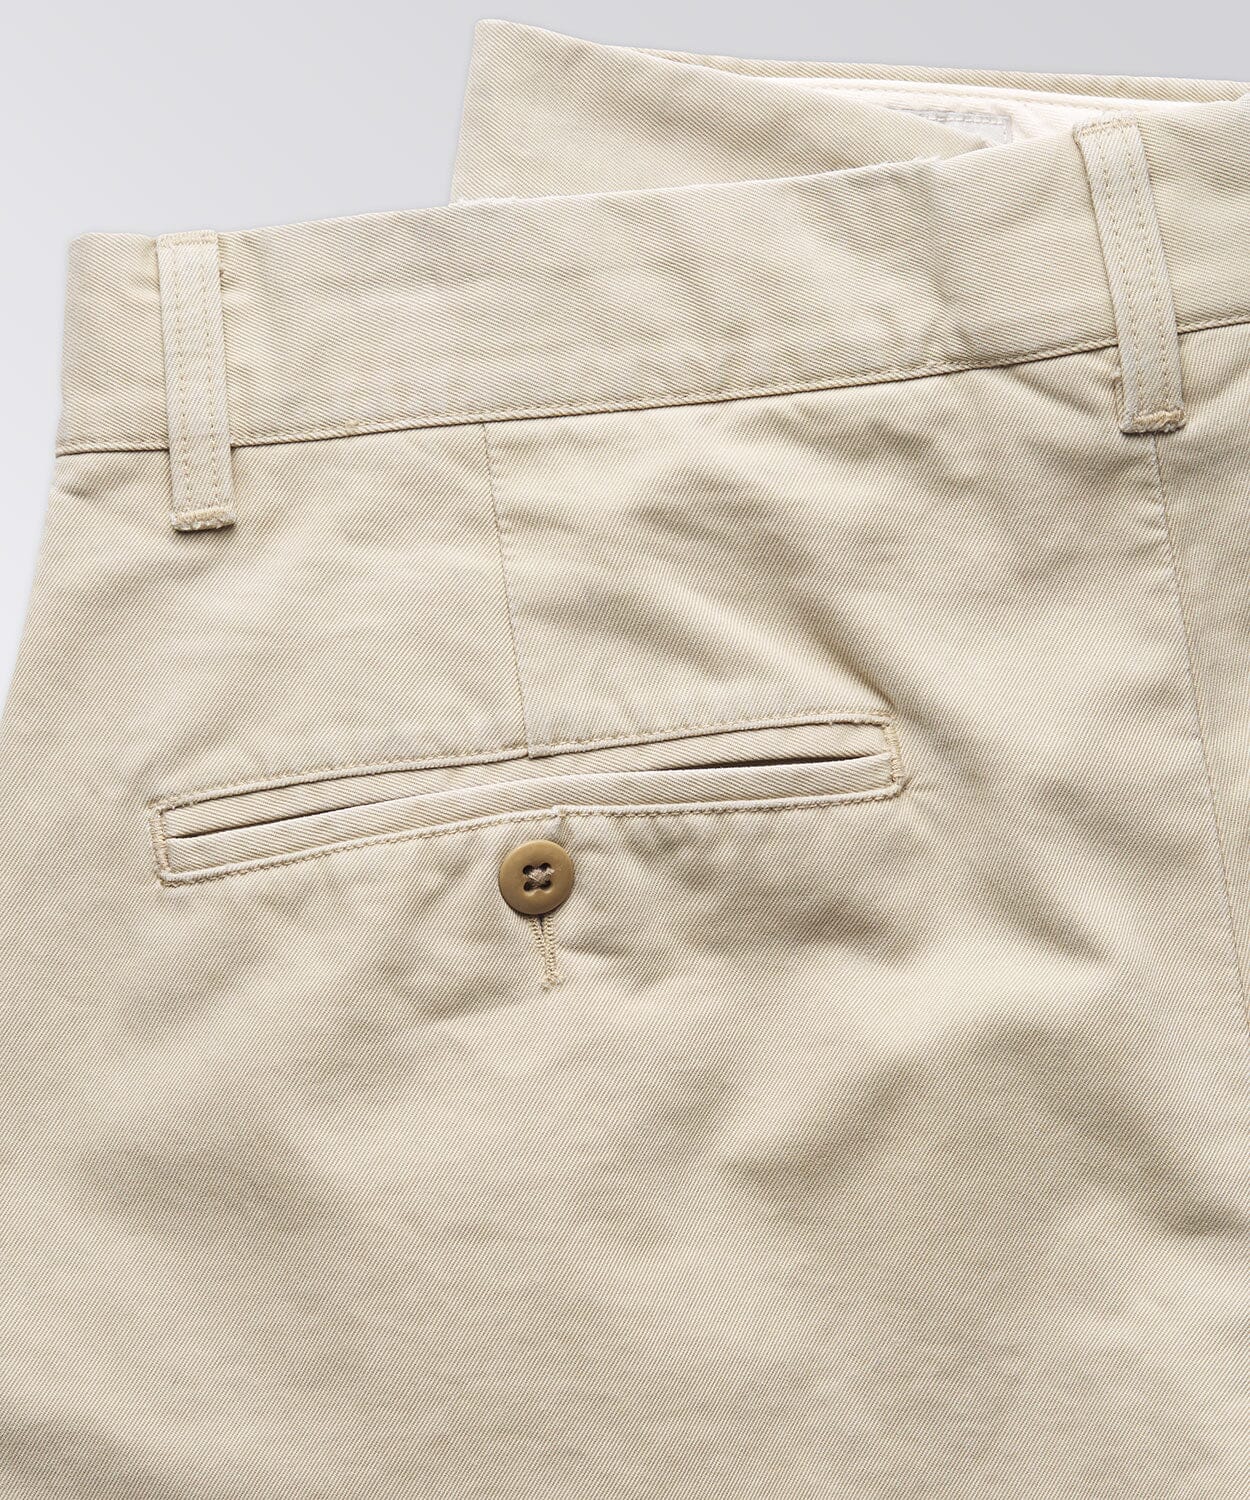 Connor Pant Pants OOBE BRAND 